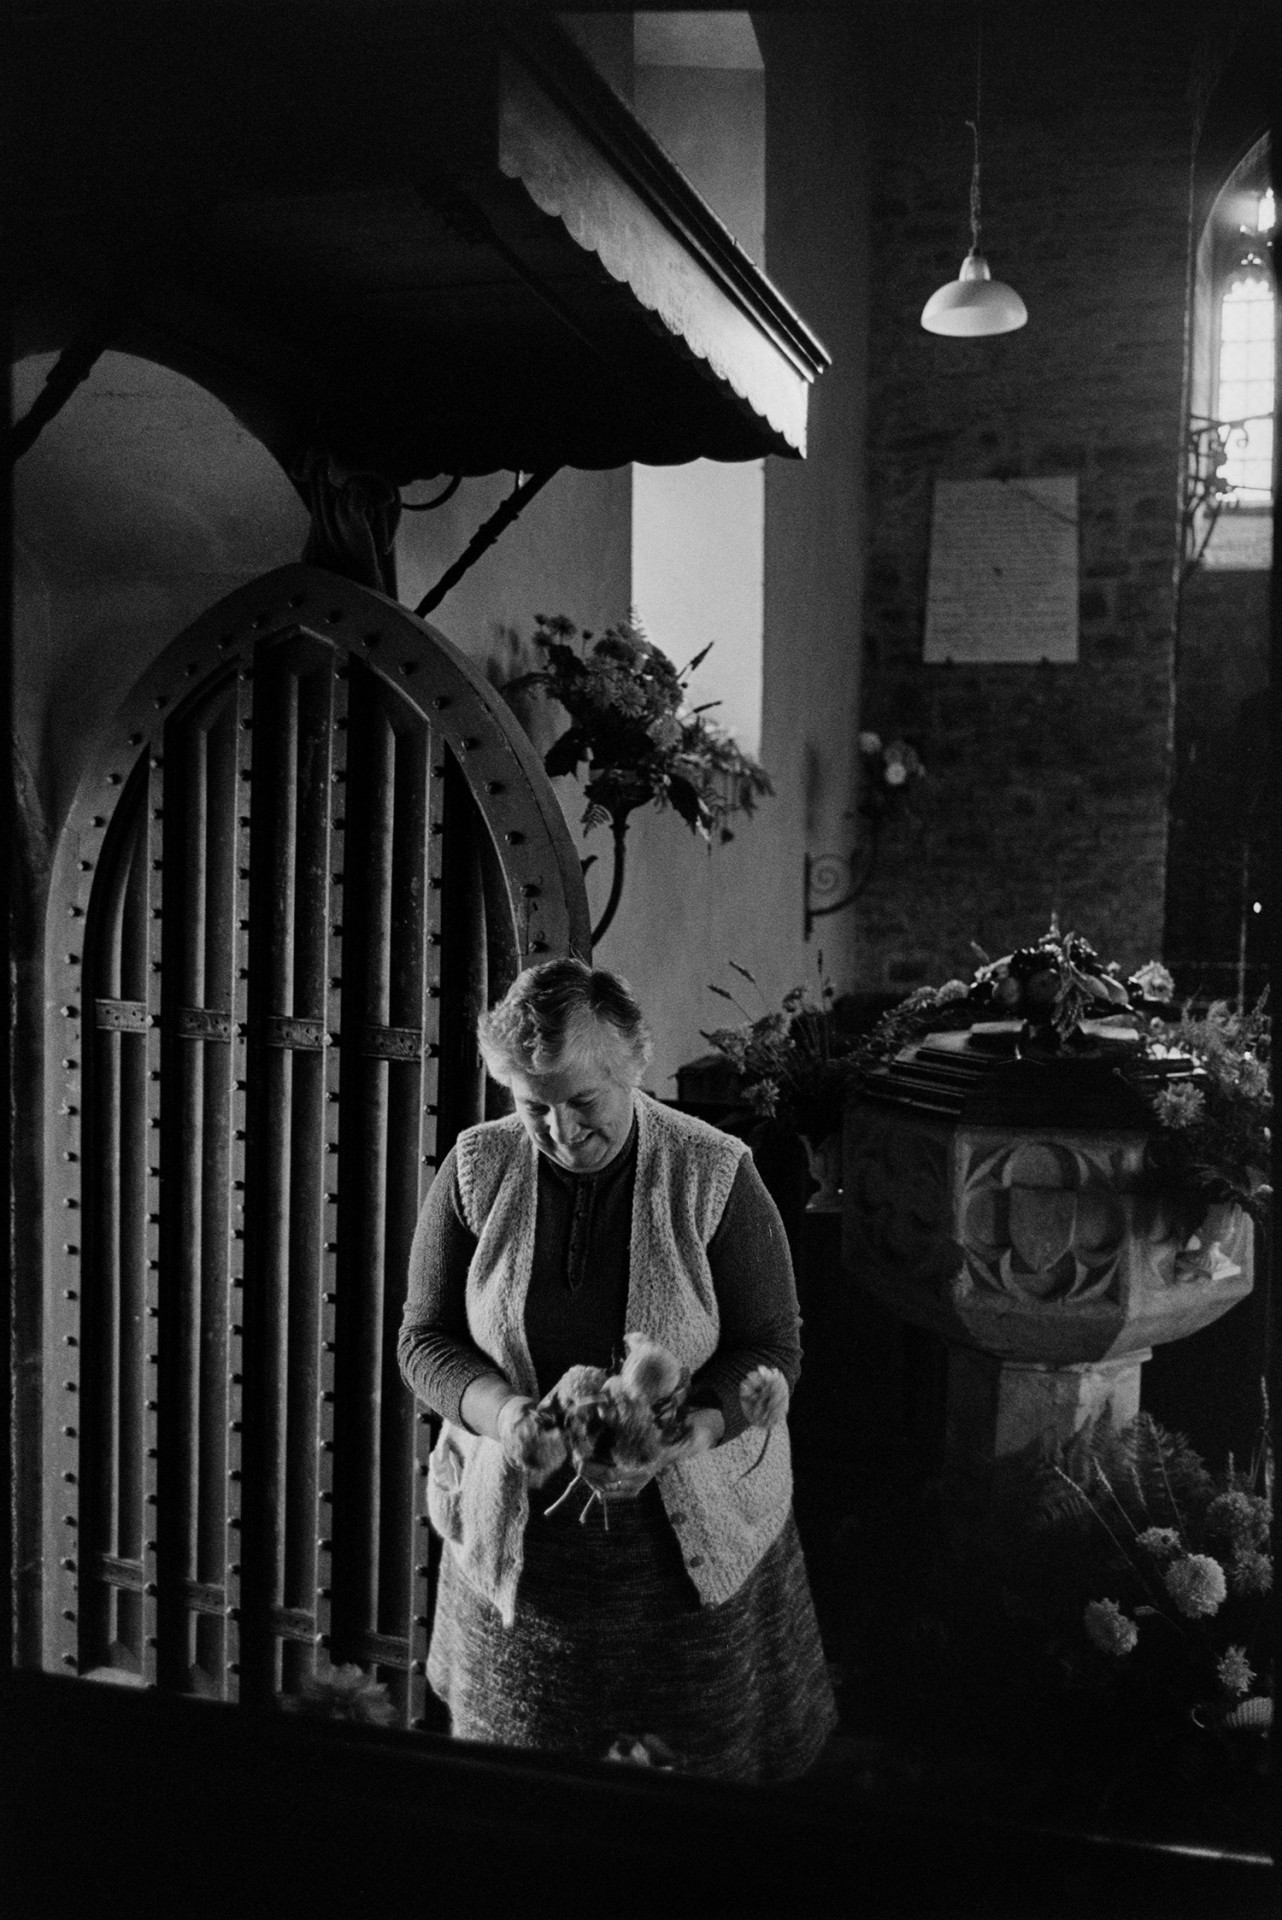 Women decorating church for Harvest Festival, flowers and produce. 
[A woman stood inside the doorway of Atherington Church. She is holding a bunch of flowers to decorate the church for the Harvest Festival. Flower displays can be seen on the font behind her.]